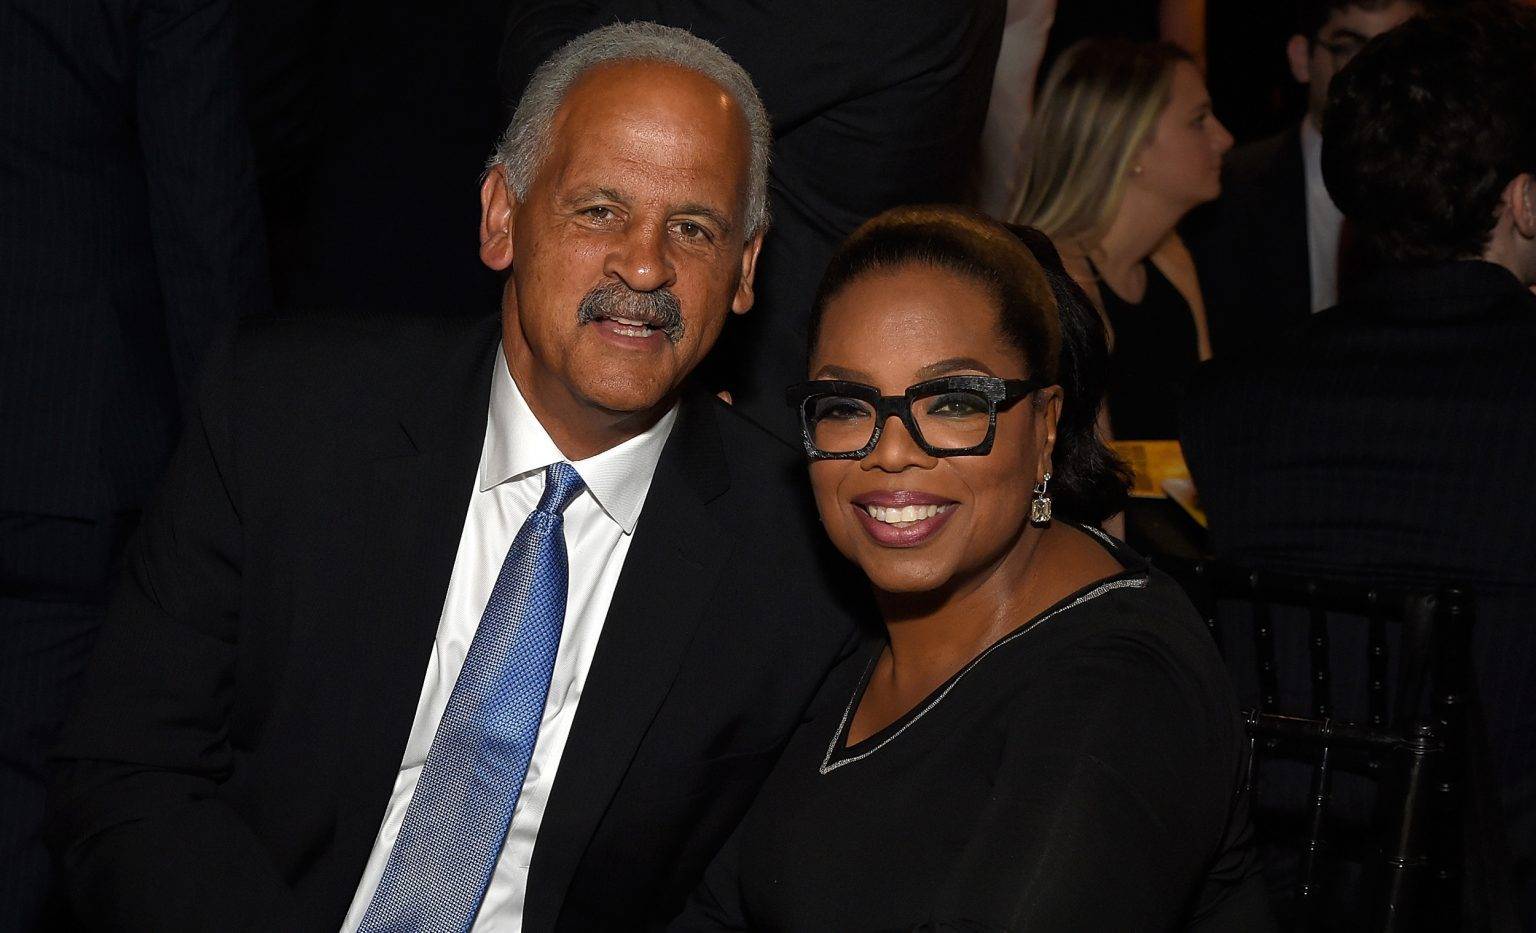 oprah winfrey children,who was the father of oprah winfrey son,stedman graham net worth,oprah winfrey husband and child,does oprah live with her partner,stedman graham first wife,oprah winfrey husband,when did oprah winfrey get married,stedman graham young,oprah winfrey partner,oprah winfrey partner stedman graham,oprah winfrey and her partner,oprah winfrey business partner,werd in 1986 de partner van oprah winfrey,partner van oprah winfrey,partner van oprah winfrey 1986,list of oprah winfrey businesses,what are the characteristics of oprah winfrey,oprah winfrey recommended products,how do you contact oprah winfrey,how can you contact oprah winfrey,how can i contact oprah winfrey directly